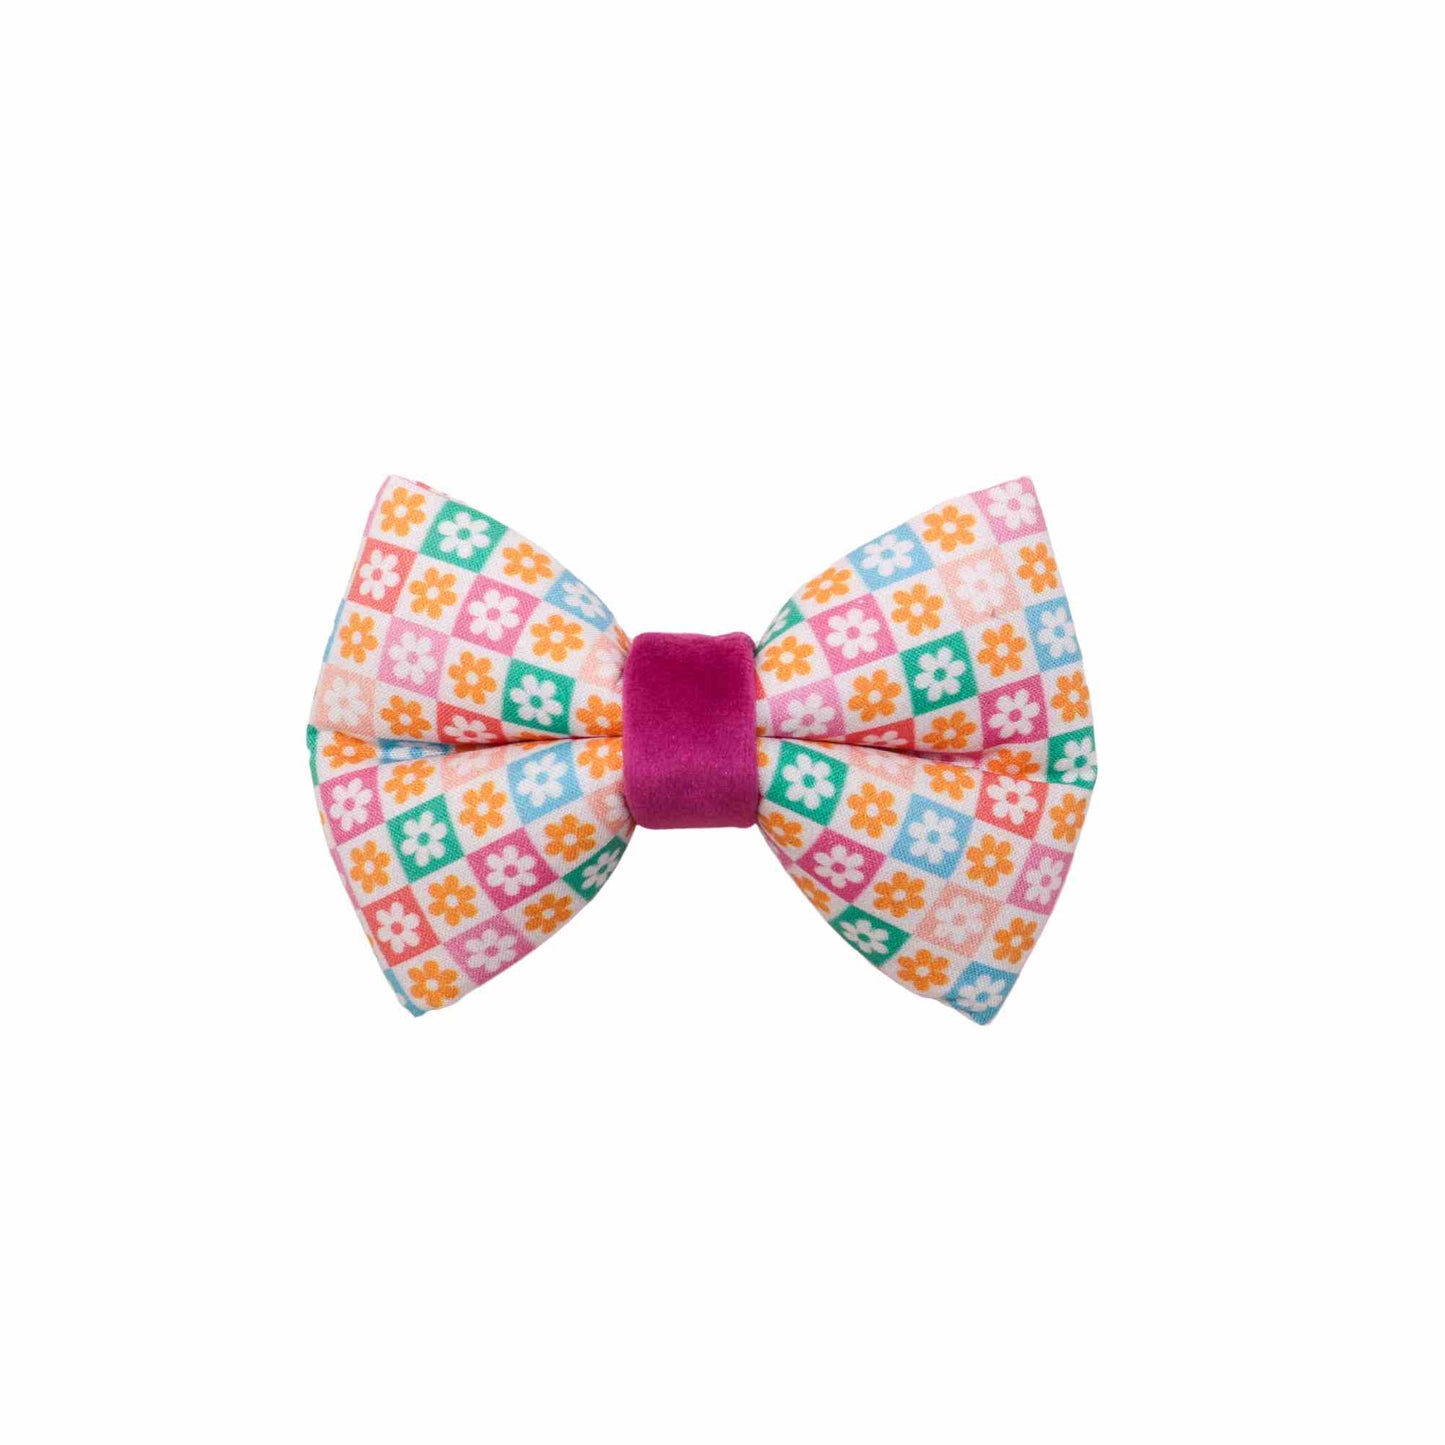 "Retro Floral" Puffy Bow Tie